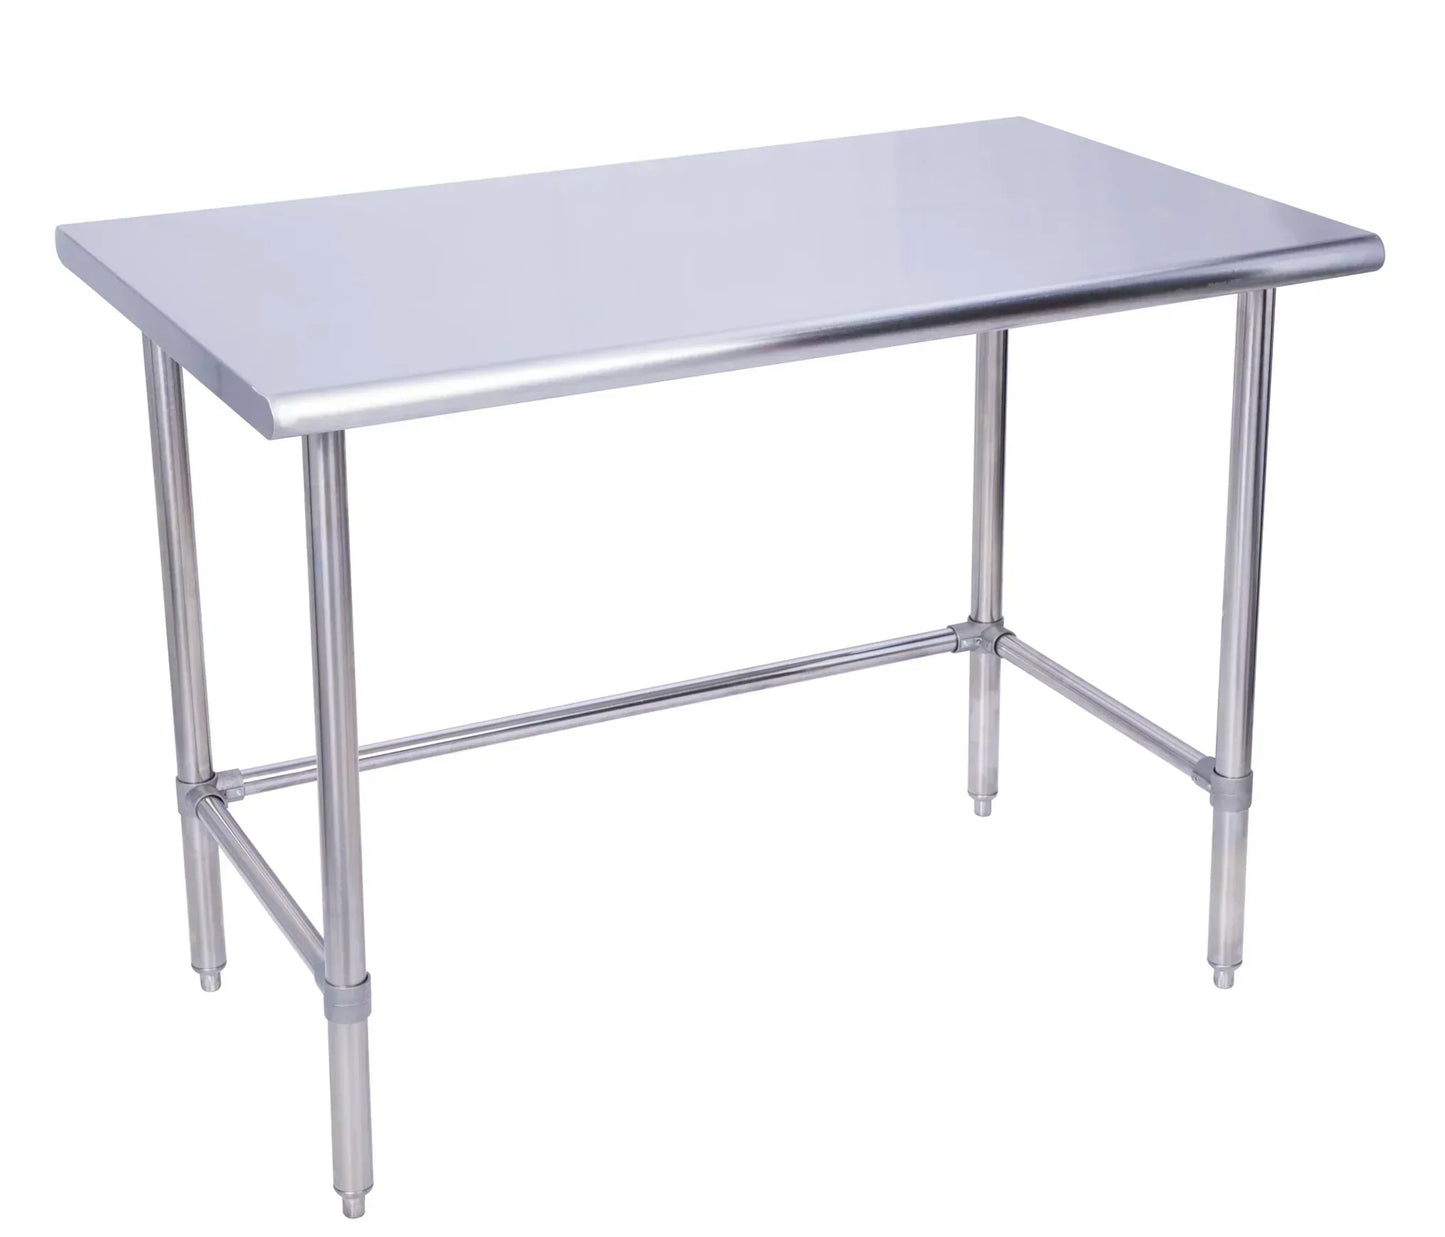 KCS WSCB-2472 24" x 72" Stainless Steel Work Table With Cross Bar